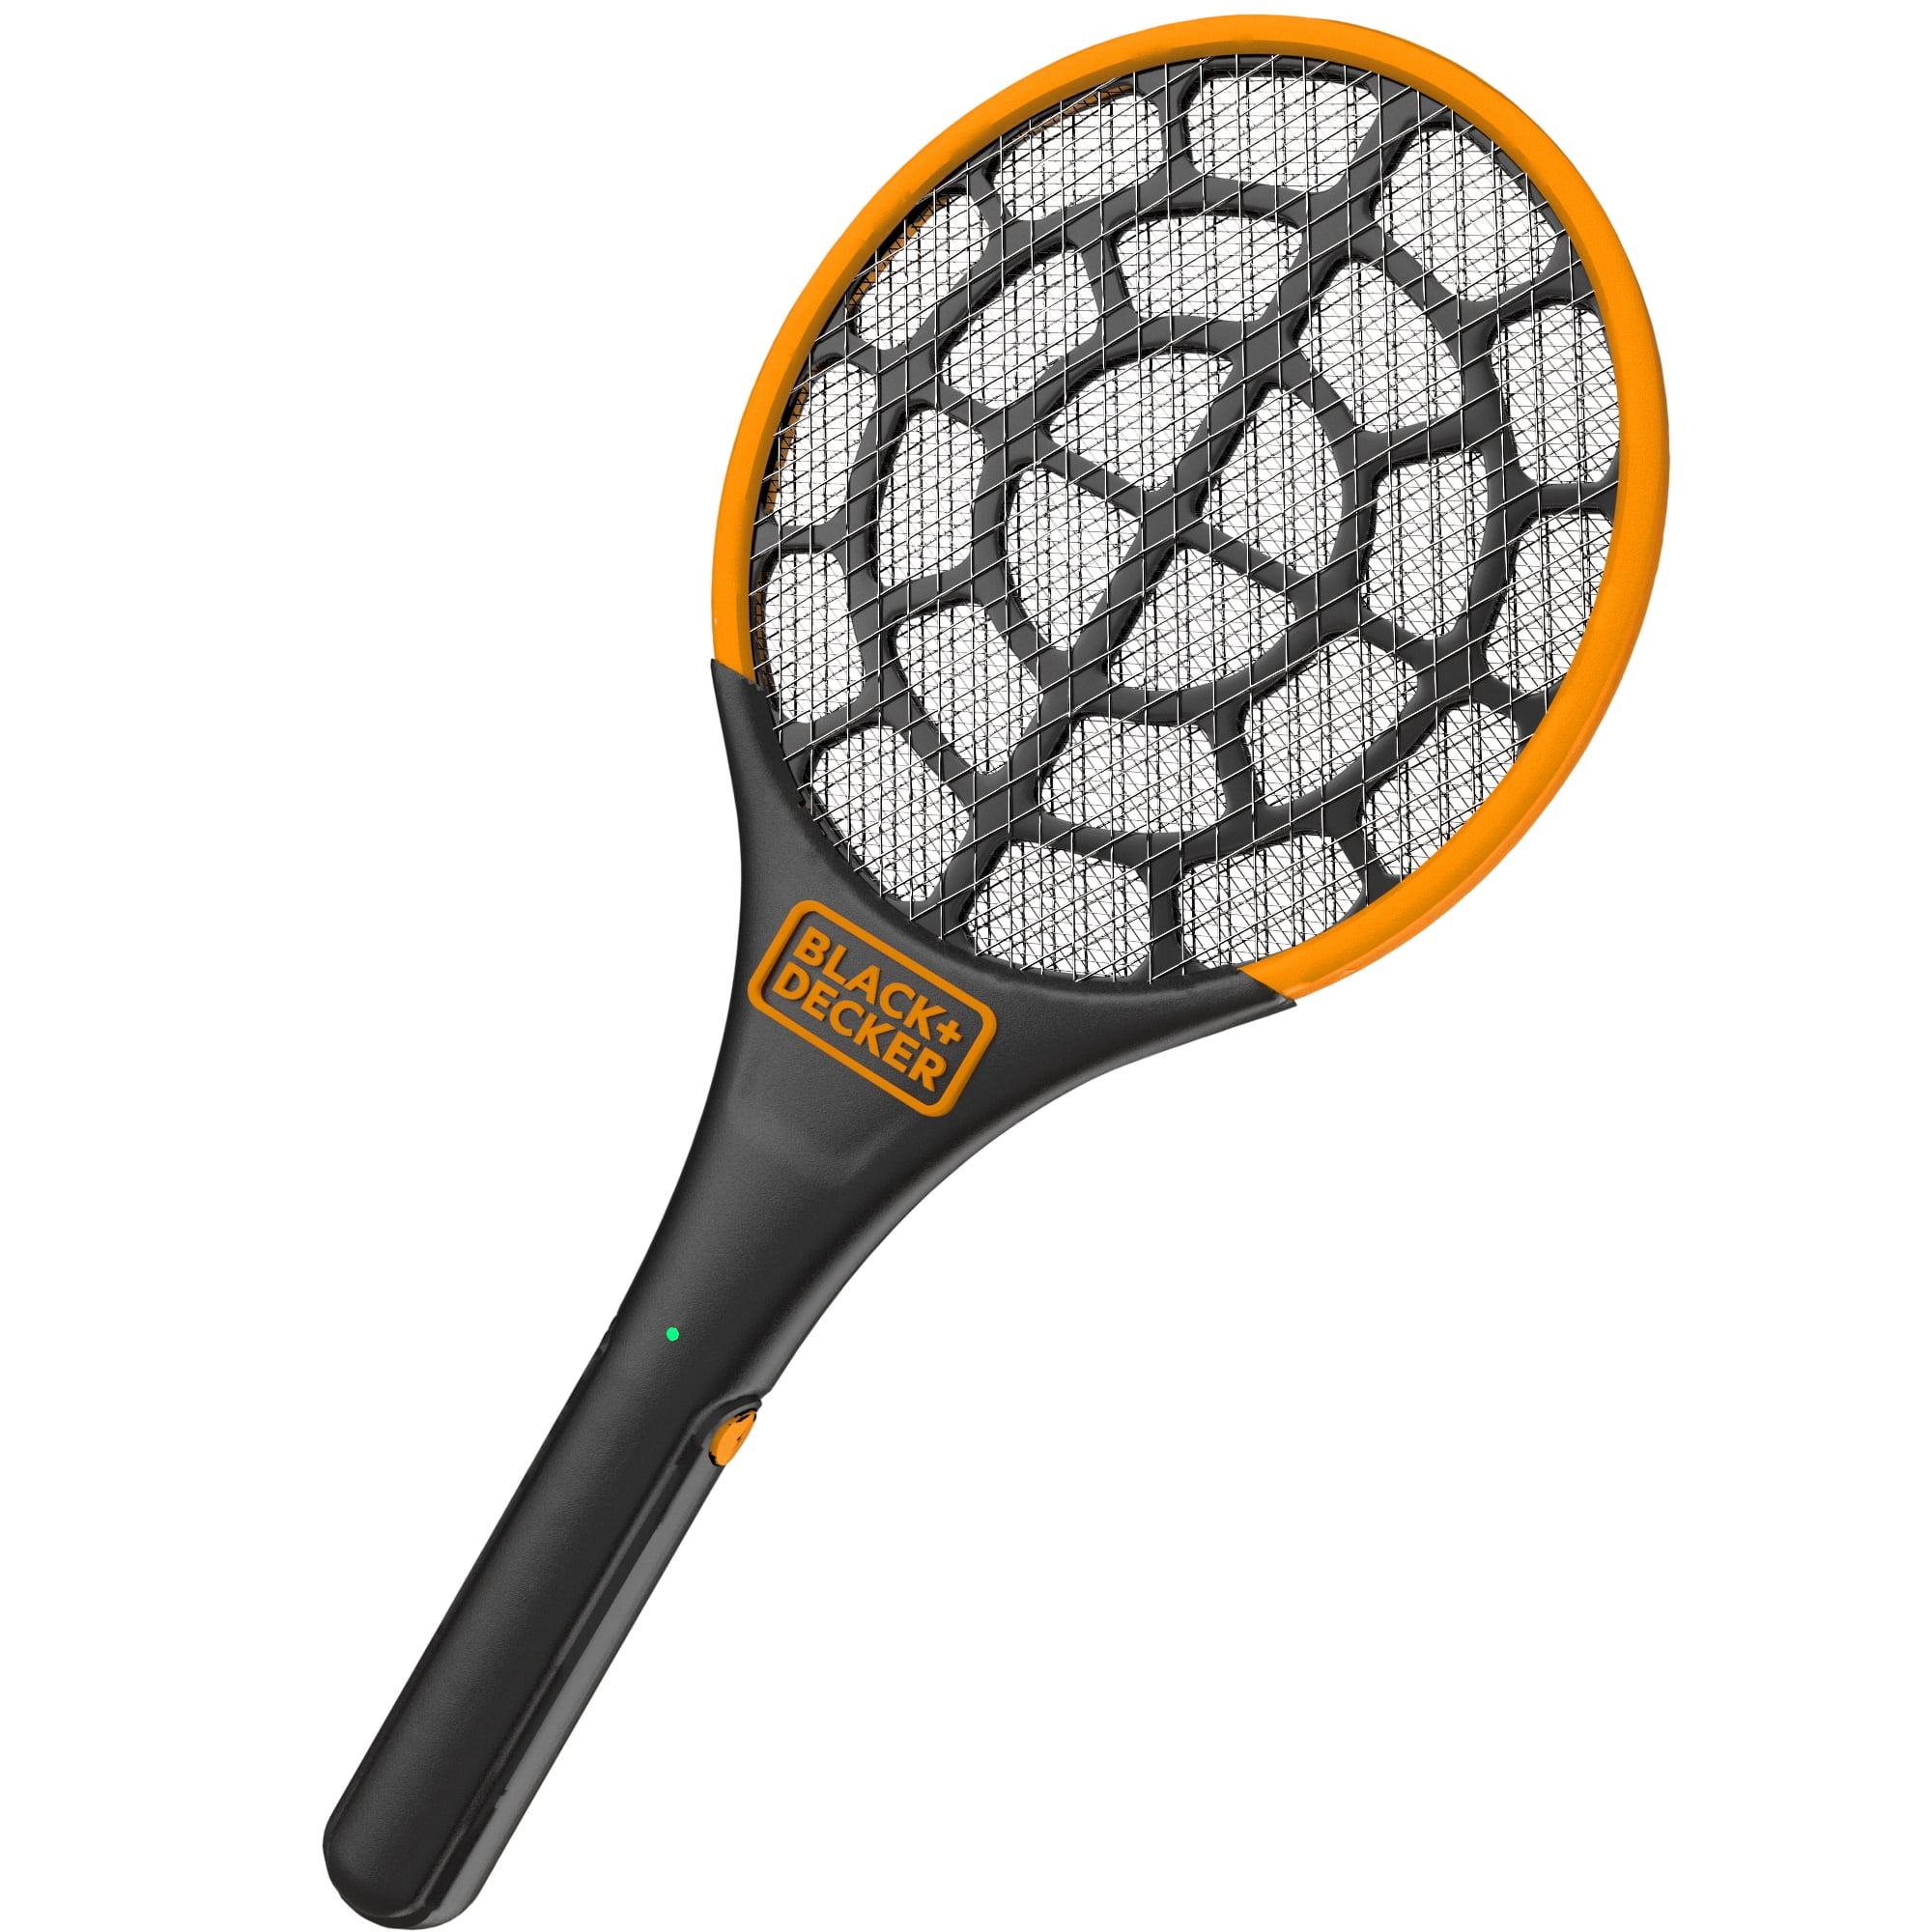 NEW Black and Decker Bug Zapper…, Home and Garden